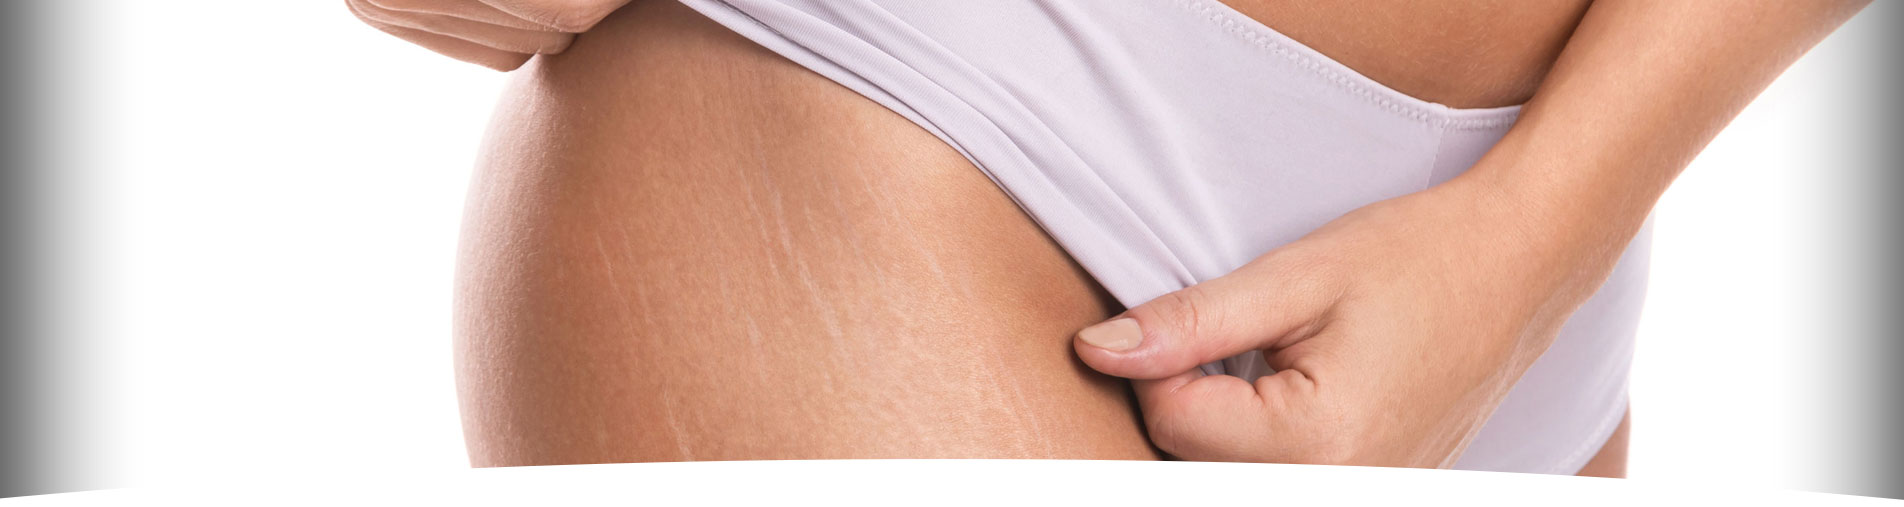 Reduction of stretch marks